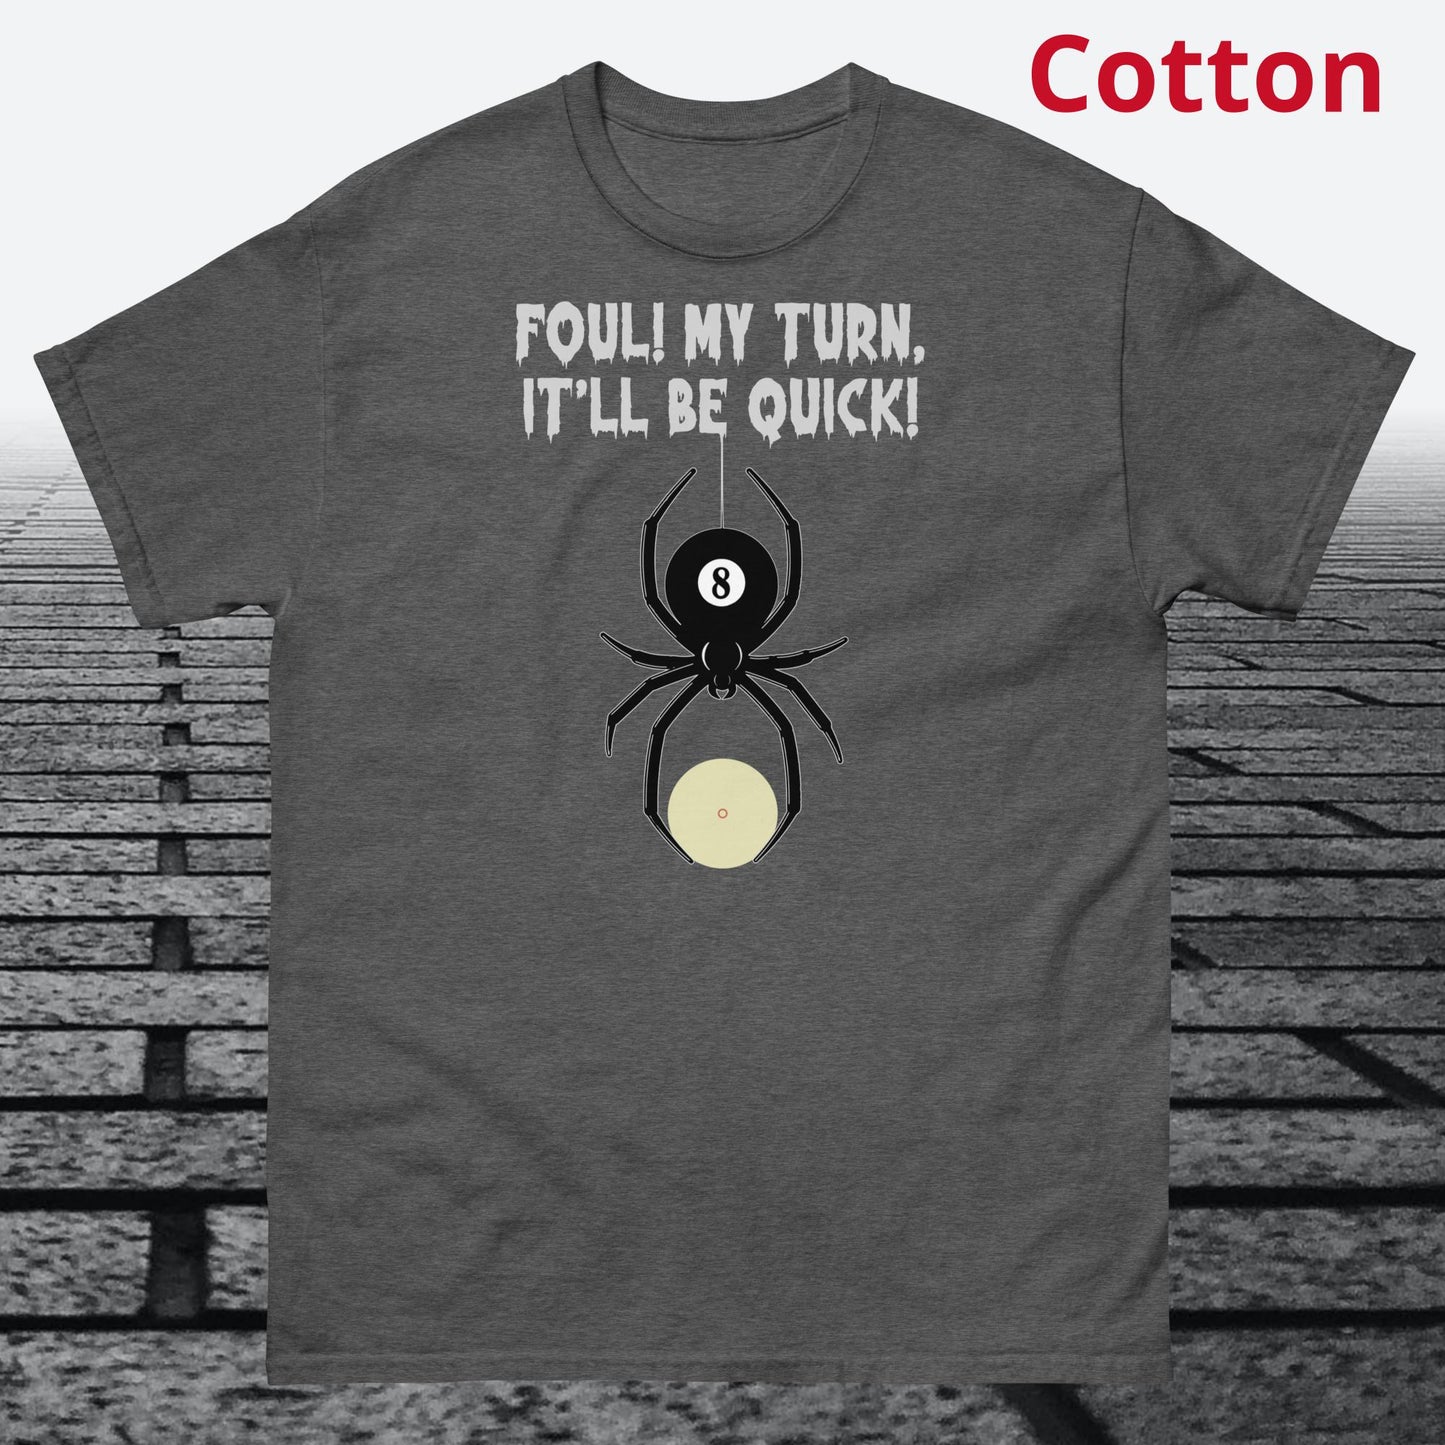 Foul, my Turn, It'll be Quick, on front of shirt, Cotton T-shirt